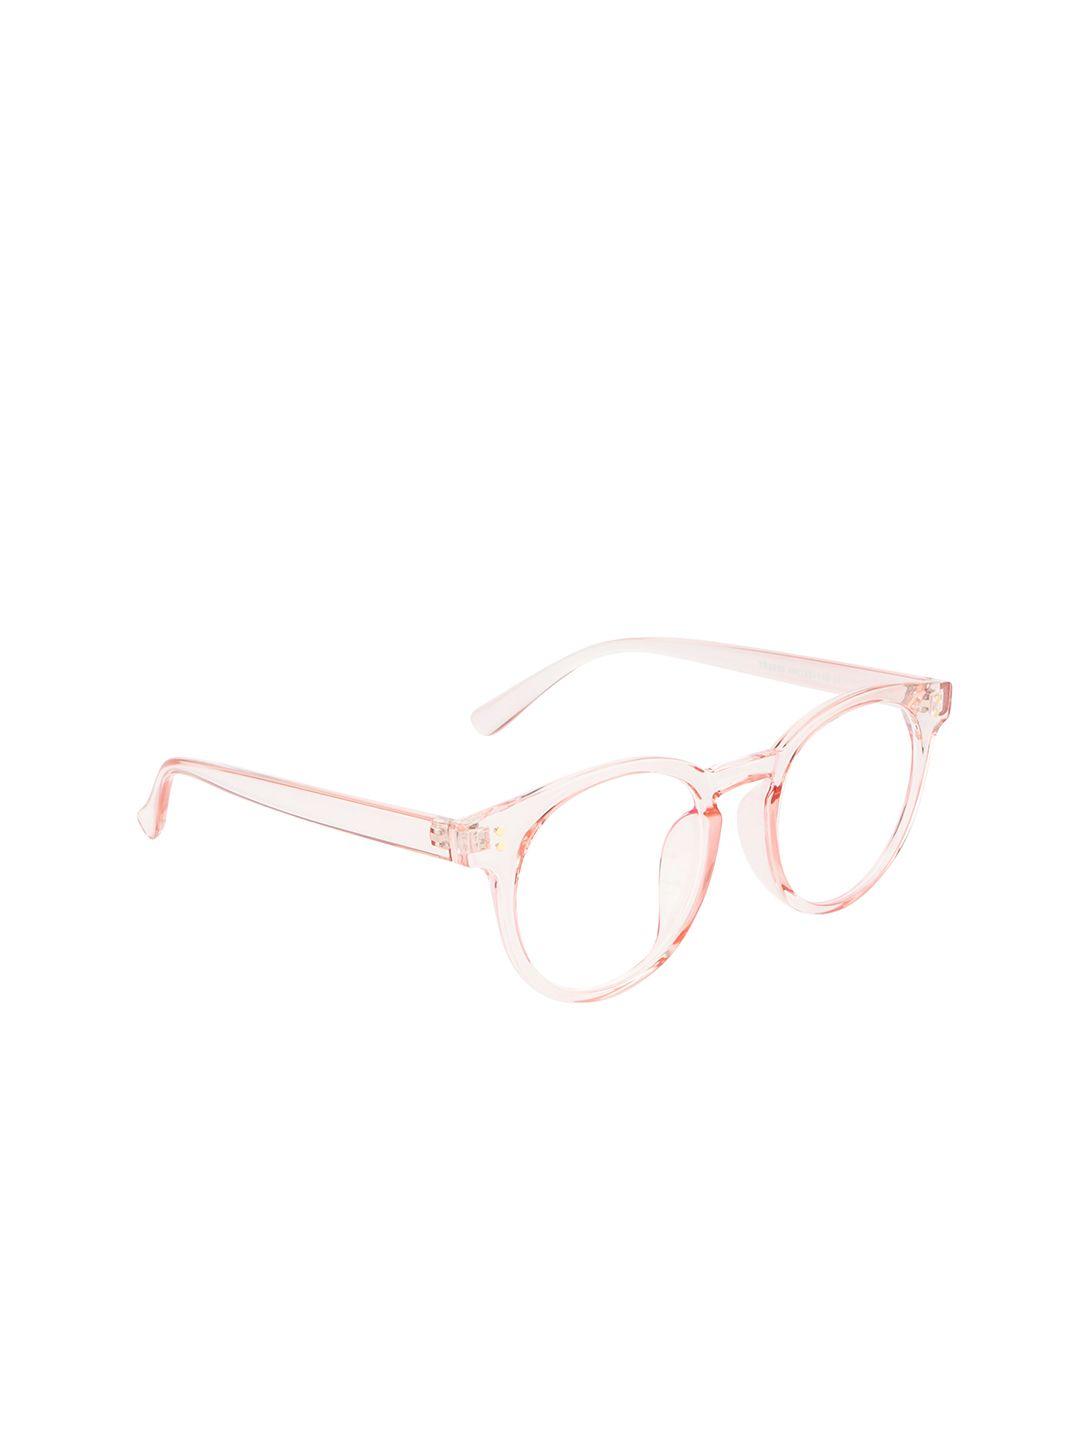 ted smith unisex pink & transparent full rim round frames tsi-8859_pink